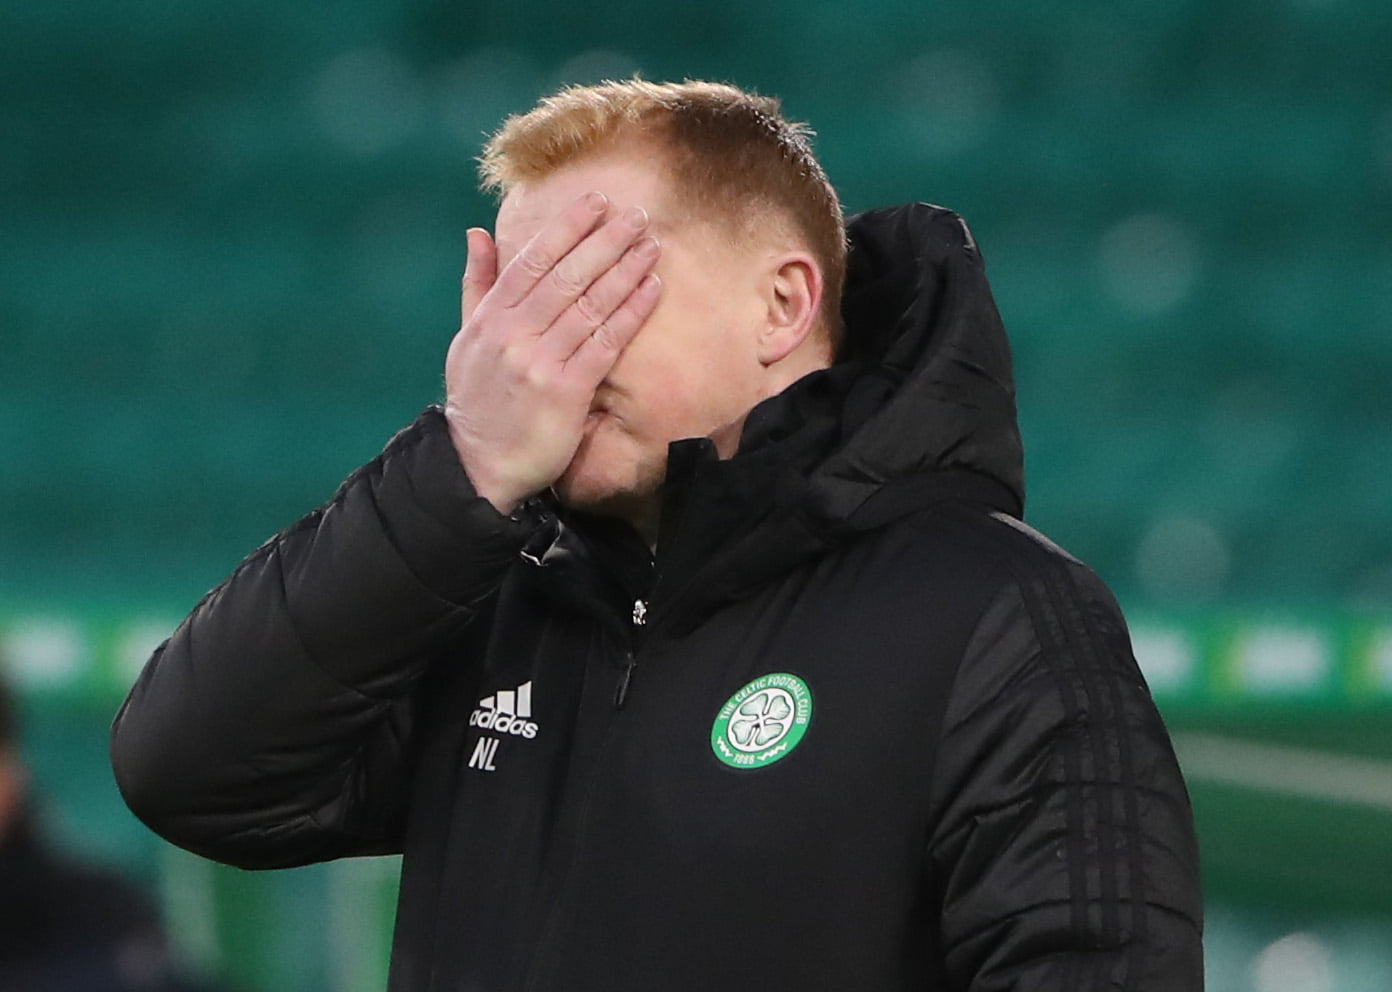 GLASGOW, SCOTLAND - JANUARY 30: Celtic manager Neil Lennon reacts during the Ladbrokes Scottish Premiership match between Celtic and St. Mirren at Celtic Park on January 30, 2021 in Glasgow, Scotland. Sporting stadiums around the UK remain under strict restrictions due to the Coronavirus Pandemic as Government social distancing laws prohibit fans inside venues resulting in games being played behind closed doors. (Photo by Ian MacNicol/Getty Images)